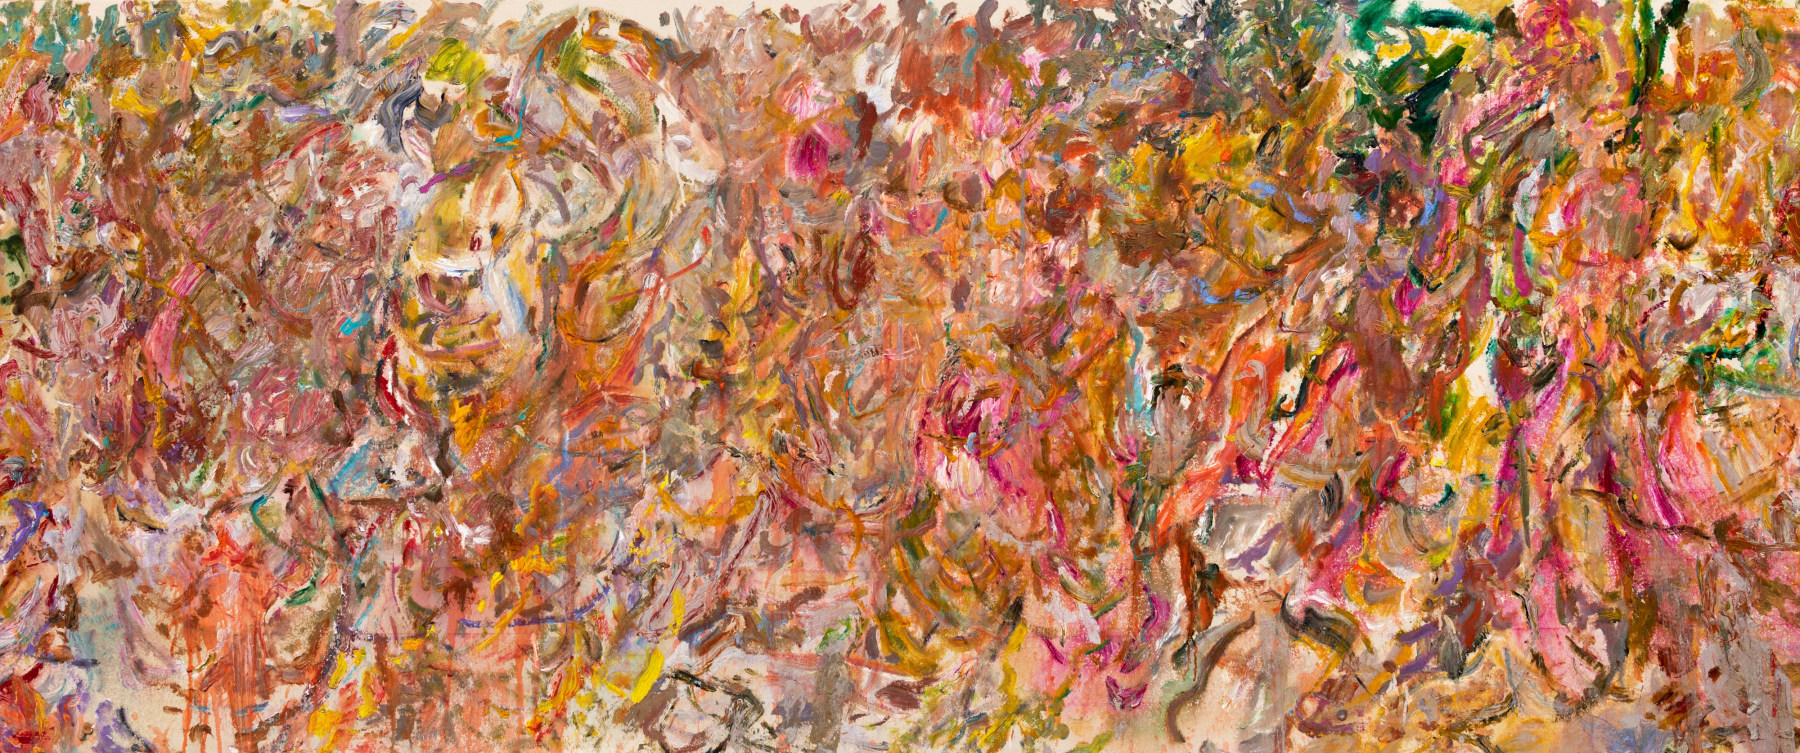 LARRY POONS (American b. 1937)

Untitled (021G-2)

2021

Acrylic on canvas

55 3/4 x 133 inches

141.6 x 337.8cm